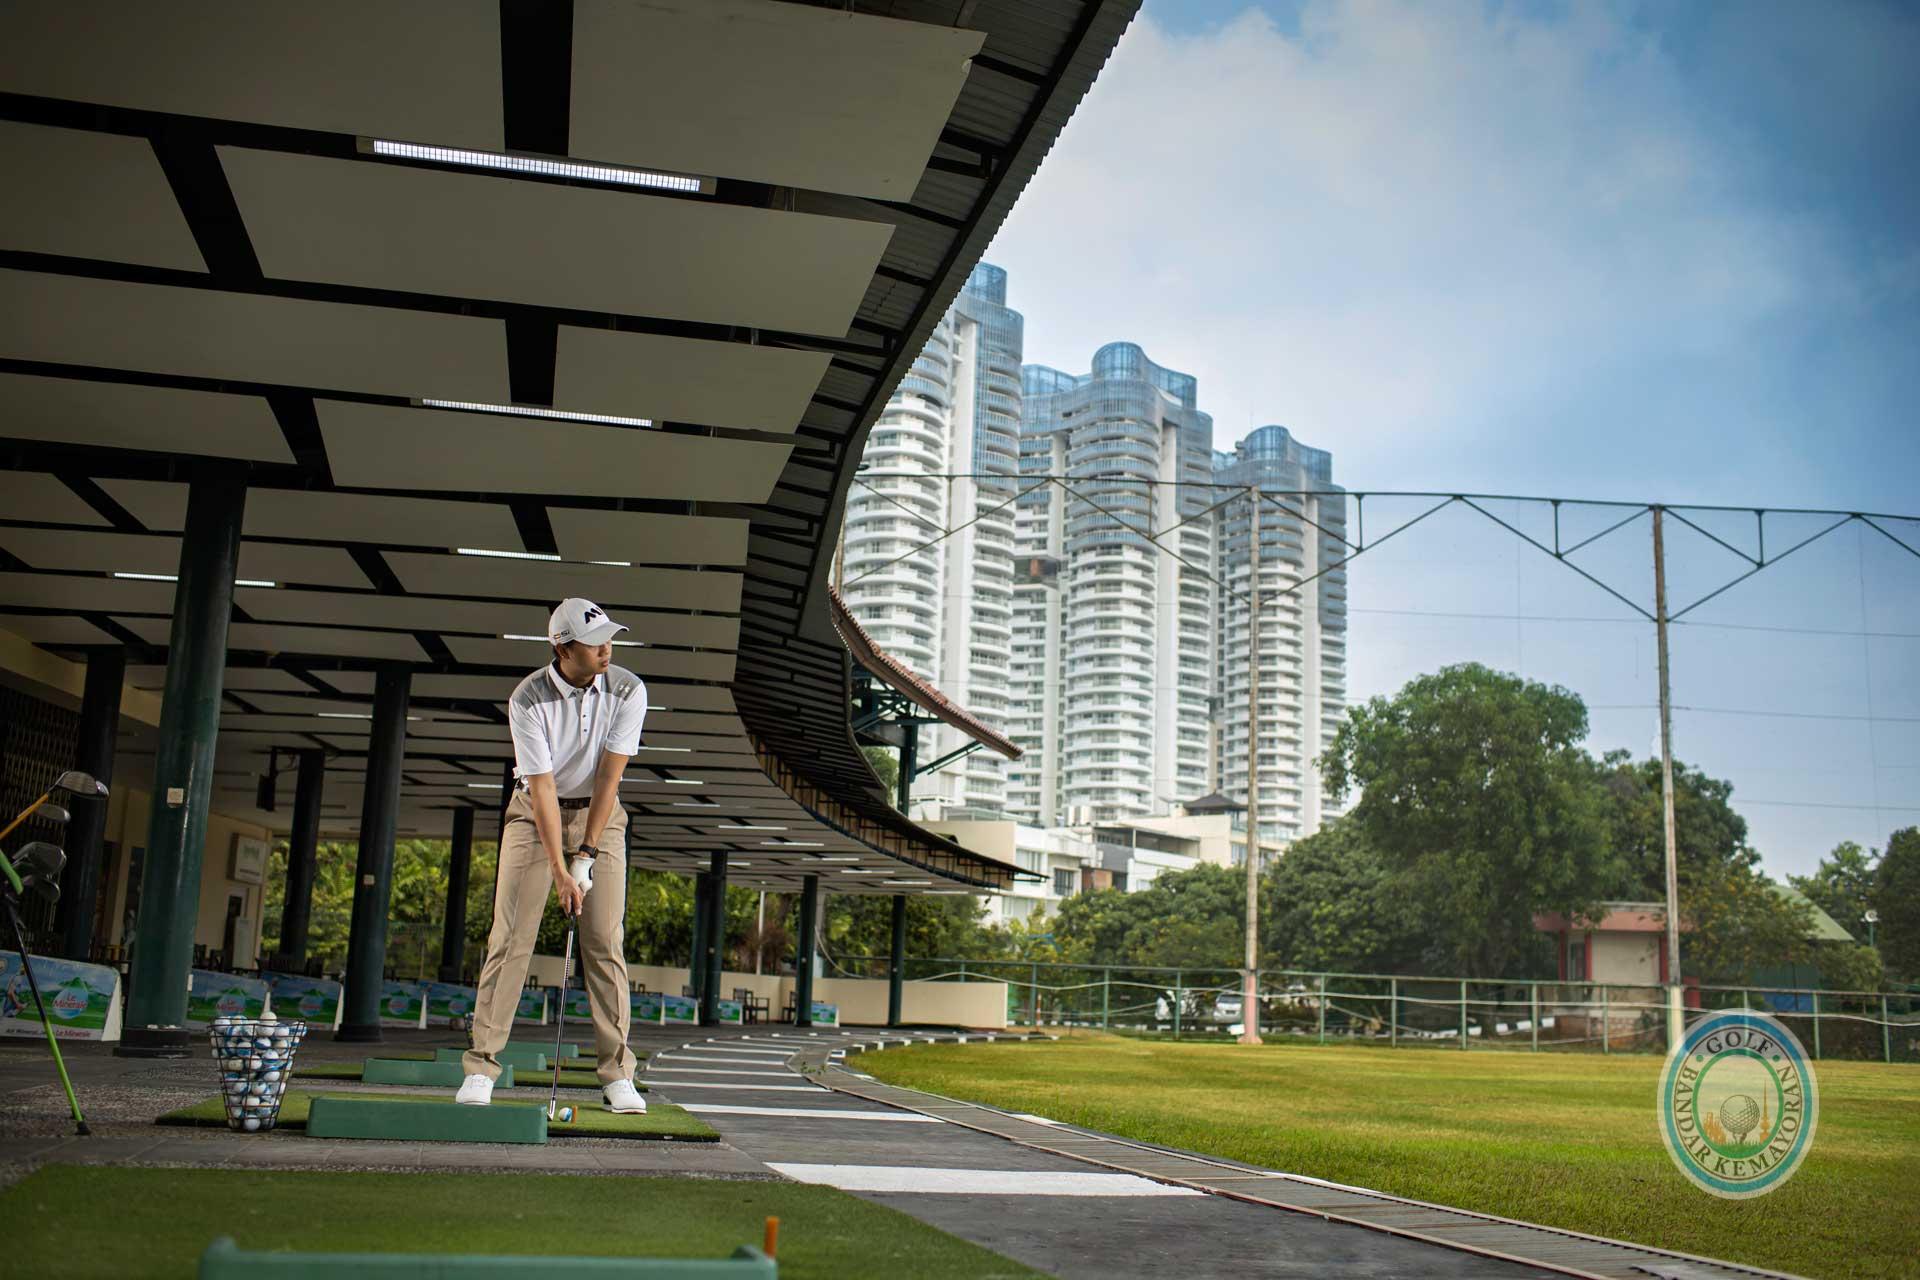 Review of Rates, Facilities, and Services at Golf Bandar Kemayoran: What’s on Offer?